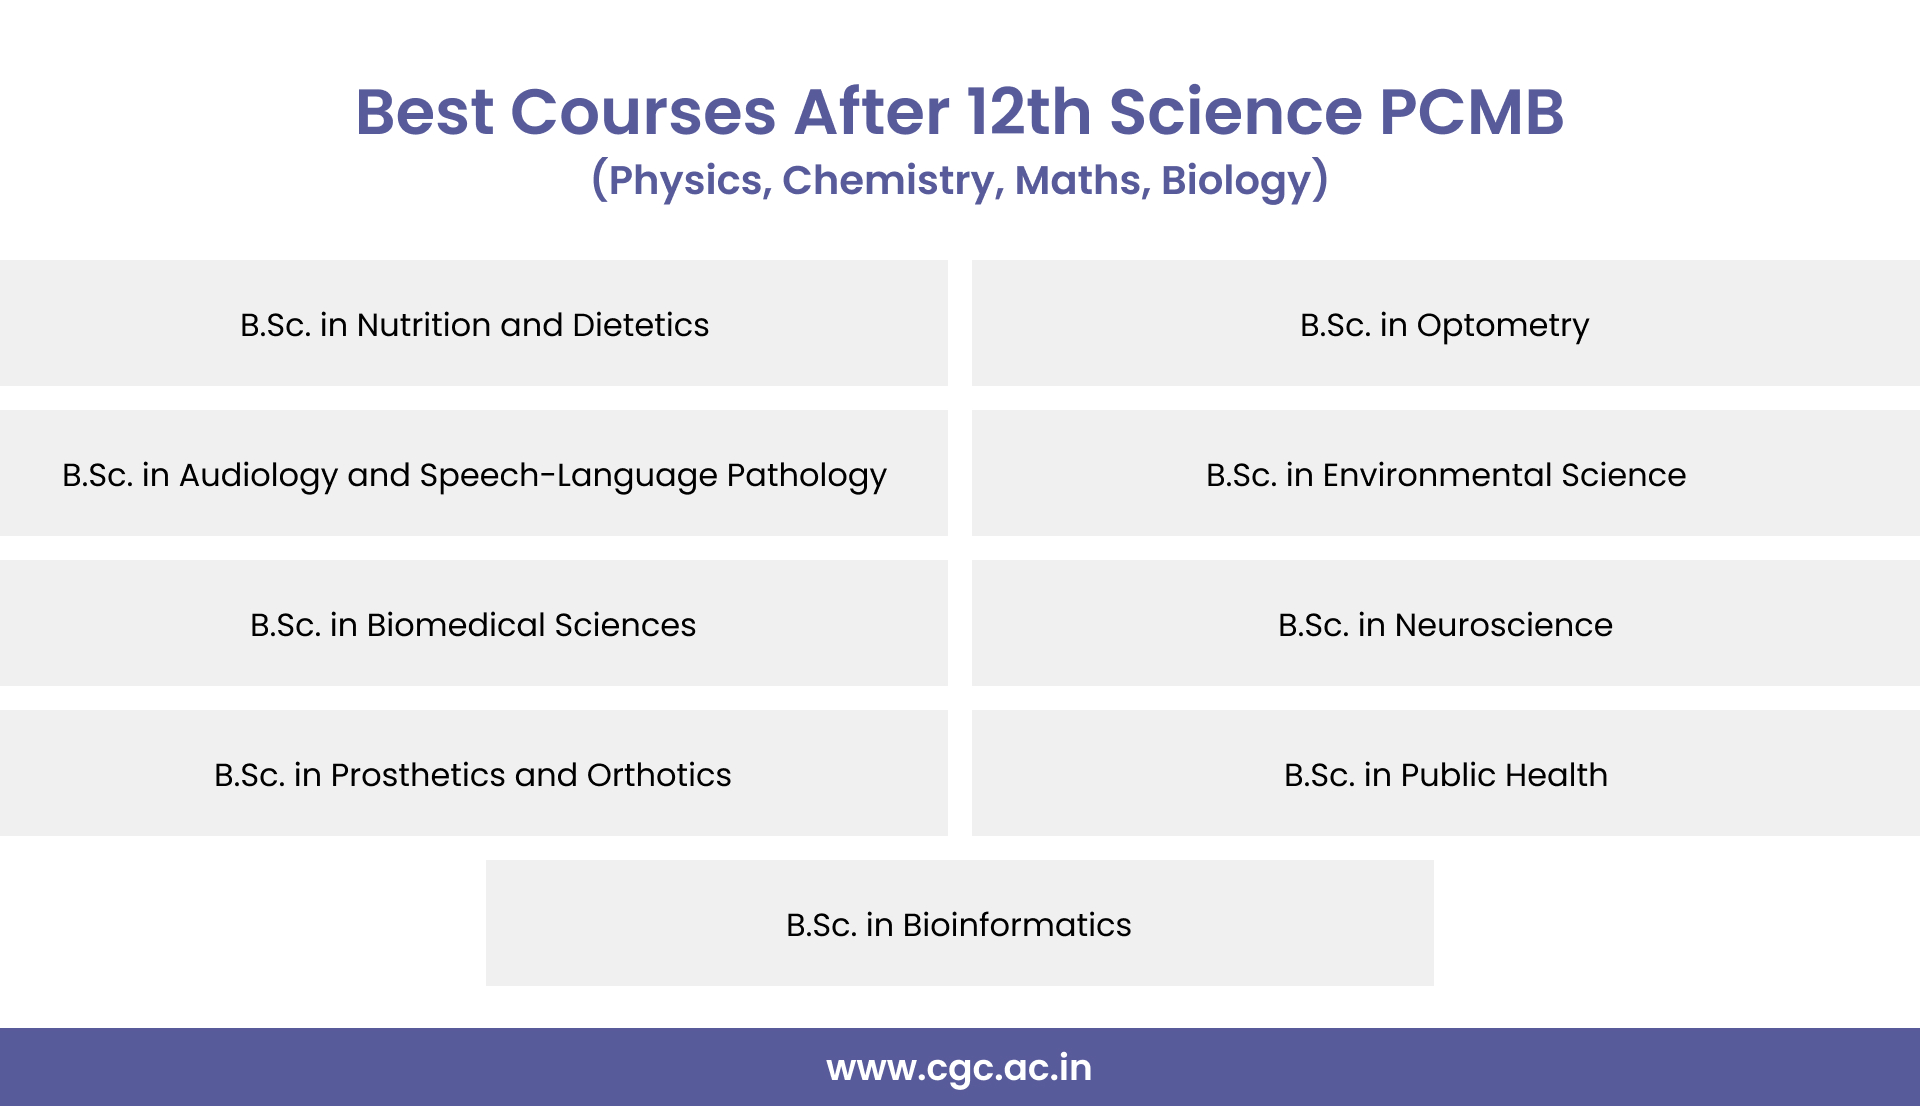 Best Courses After 12th Science PCMB (Physics, Chemistry, Maths, Biology)